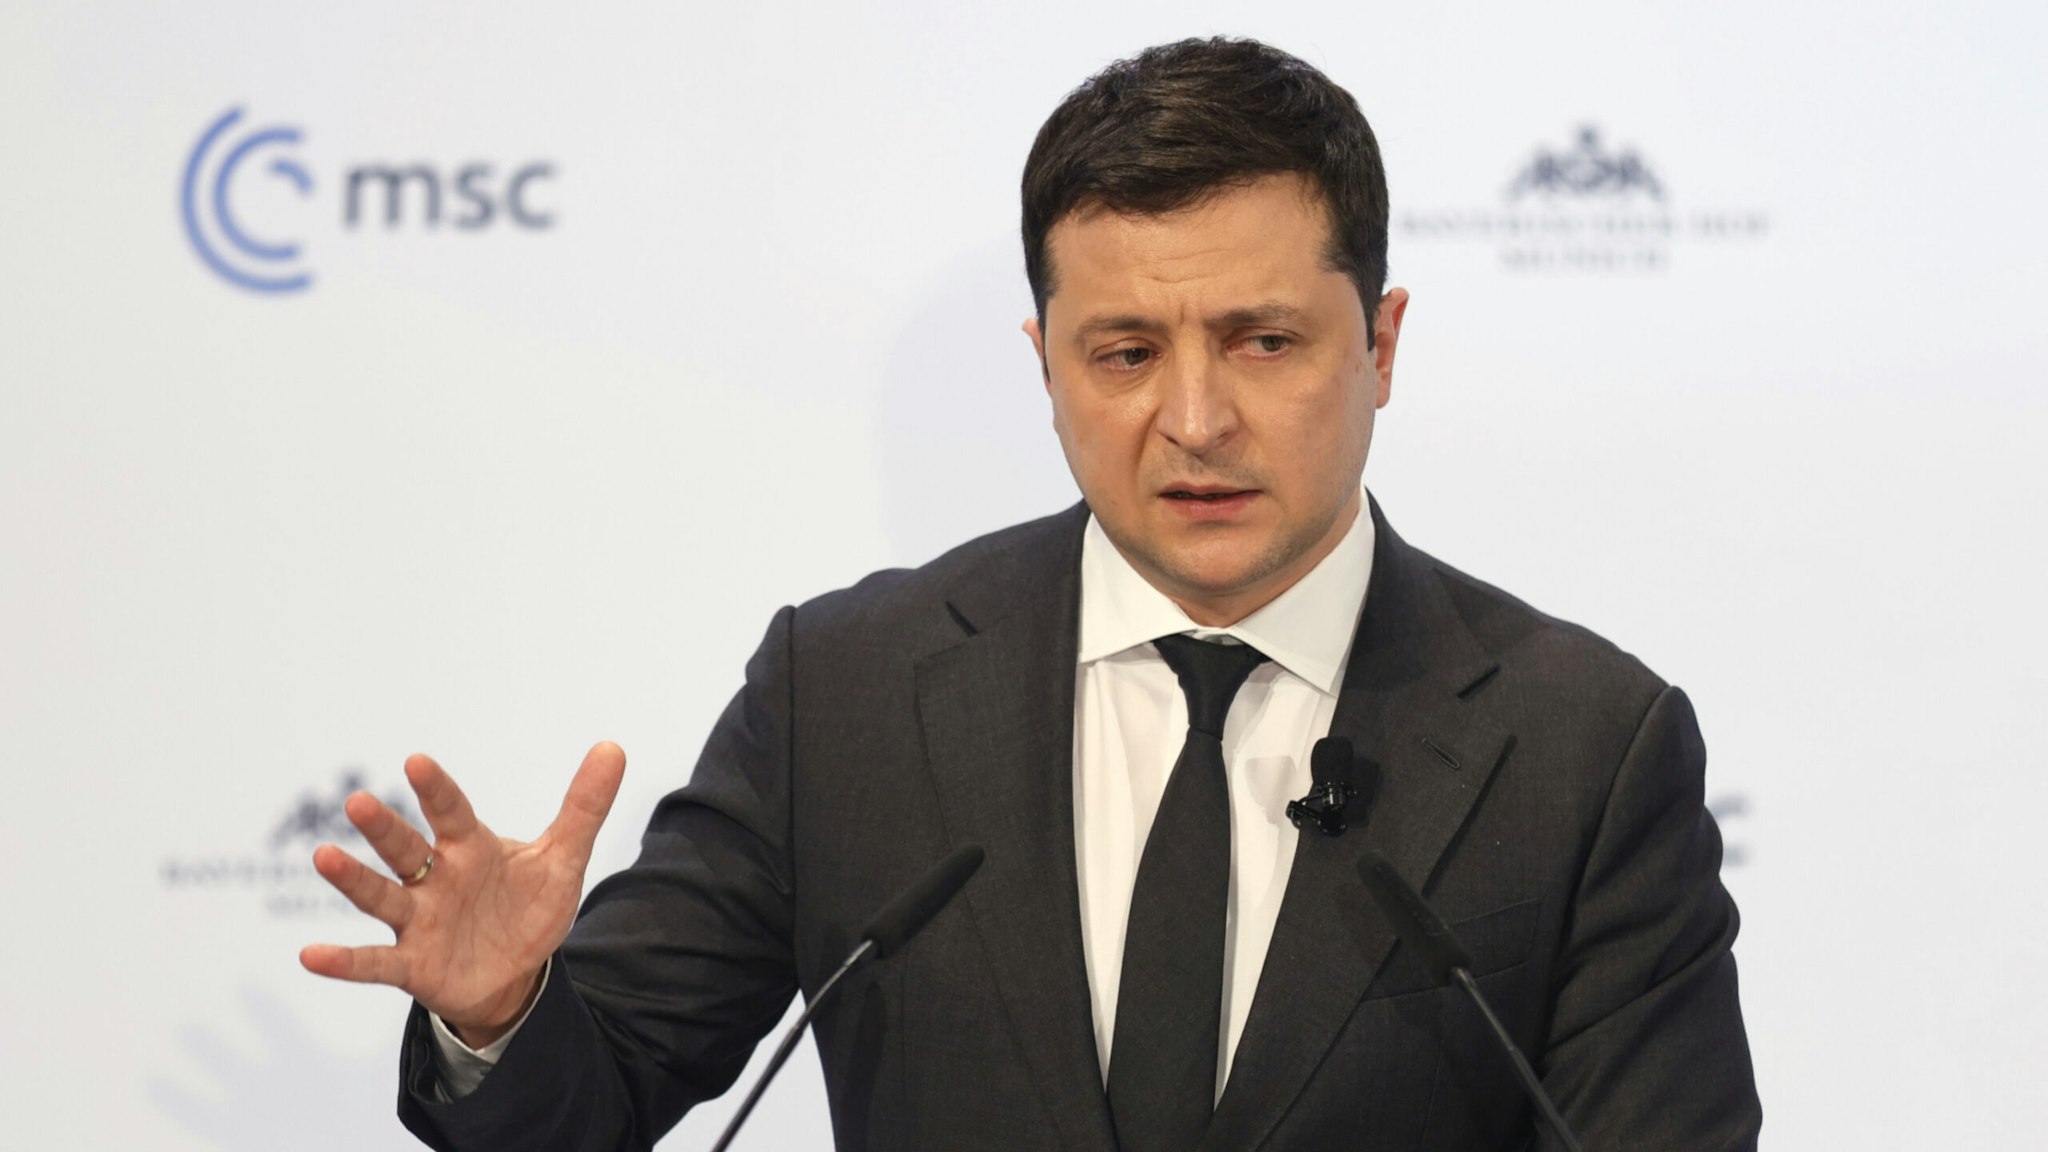 Ukrainian President Volodymyr Zelensky delivers a statement during the 58th Munich Security Conference (MSC) on February 19, 2022 in Munich, Germany.